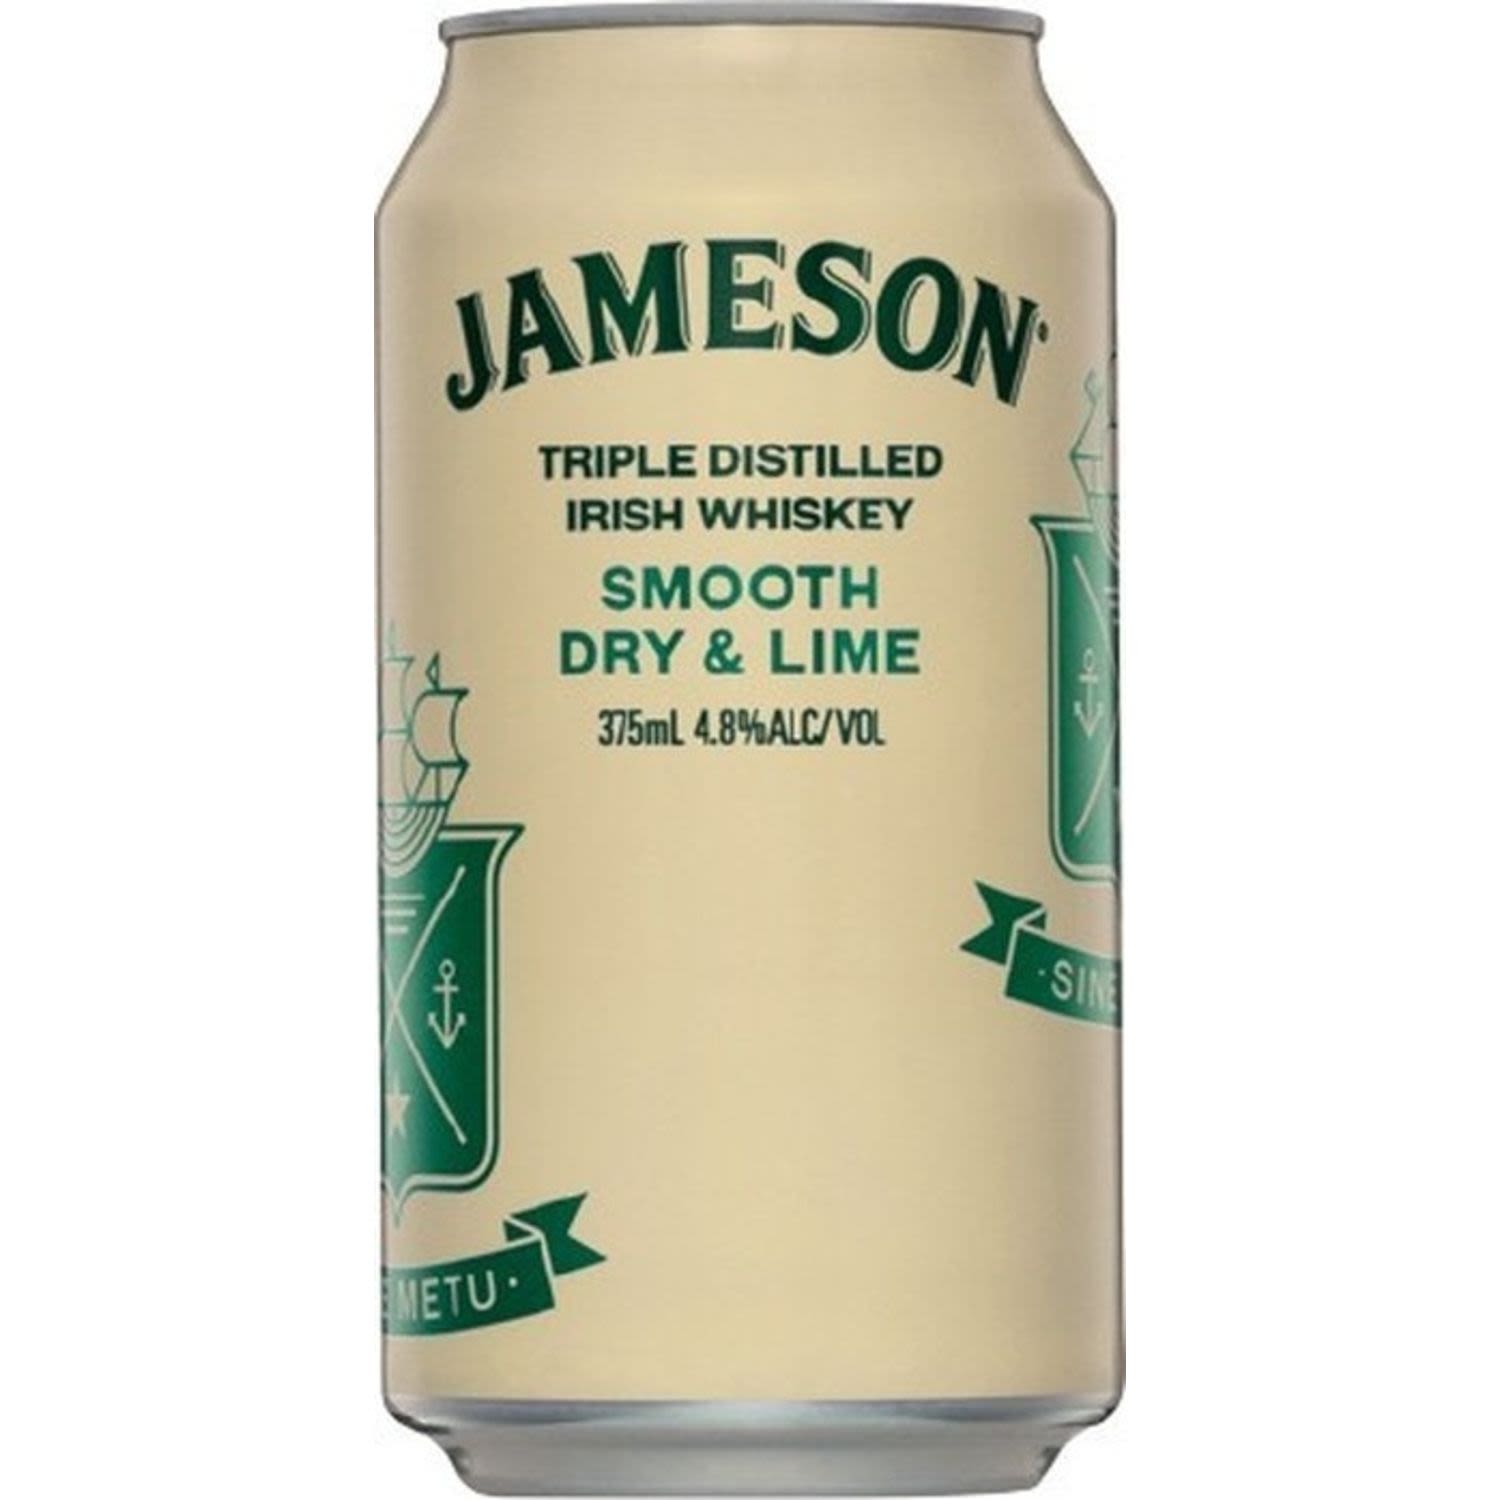 Jameson Smooth Dry & Lime 4.8% Can 375mL 24 Pack